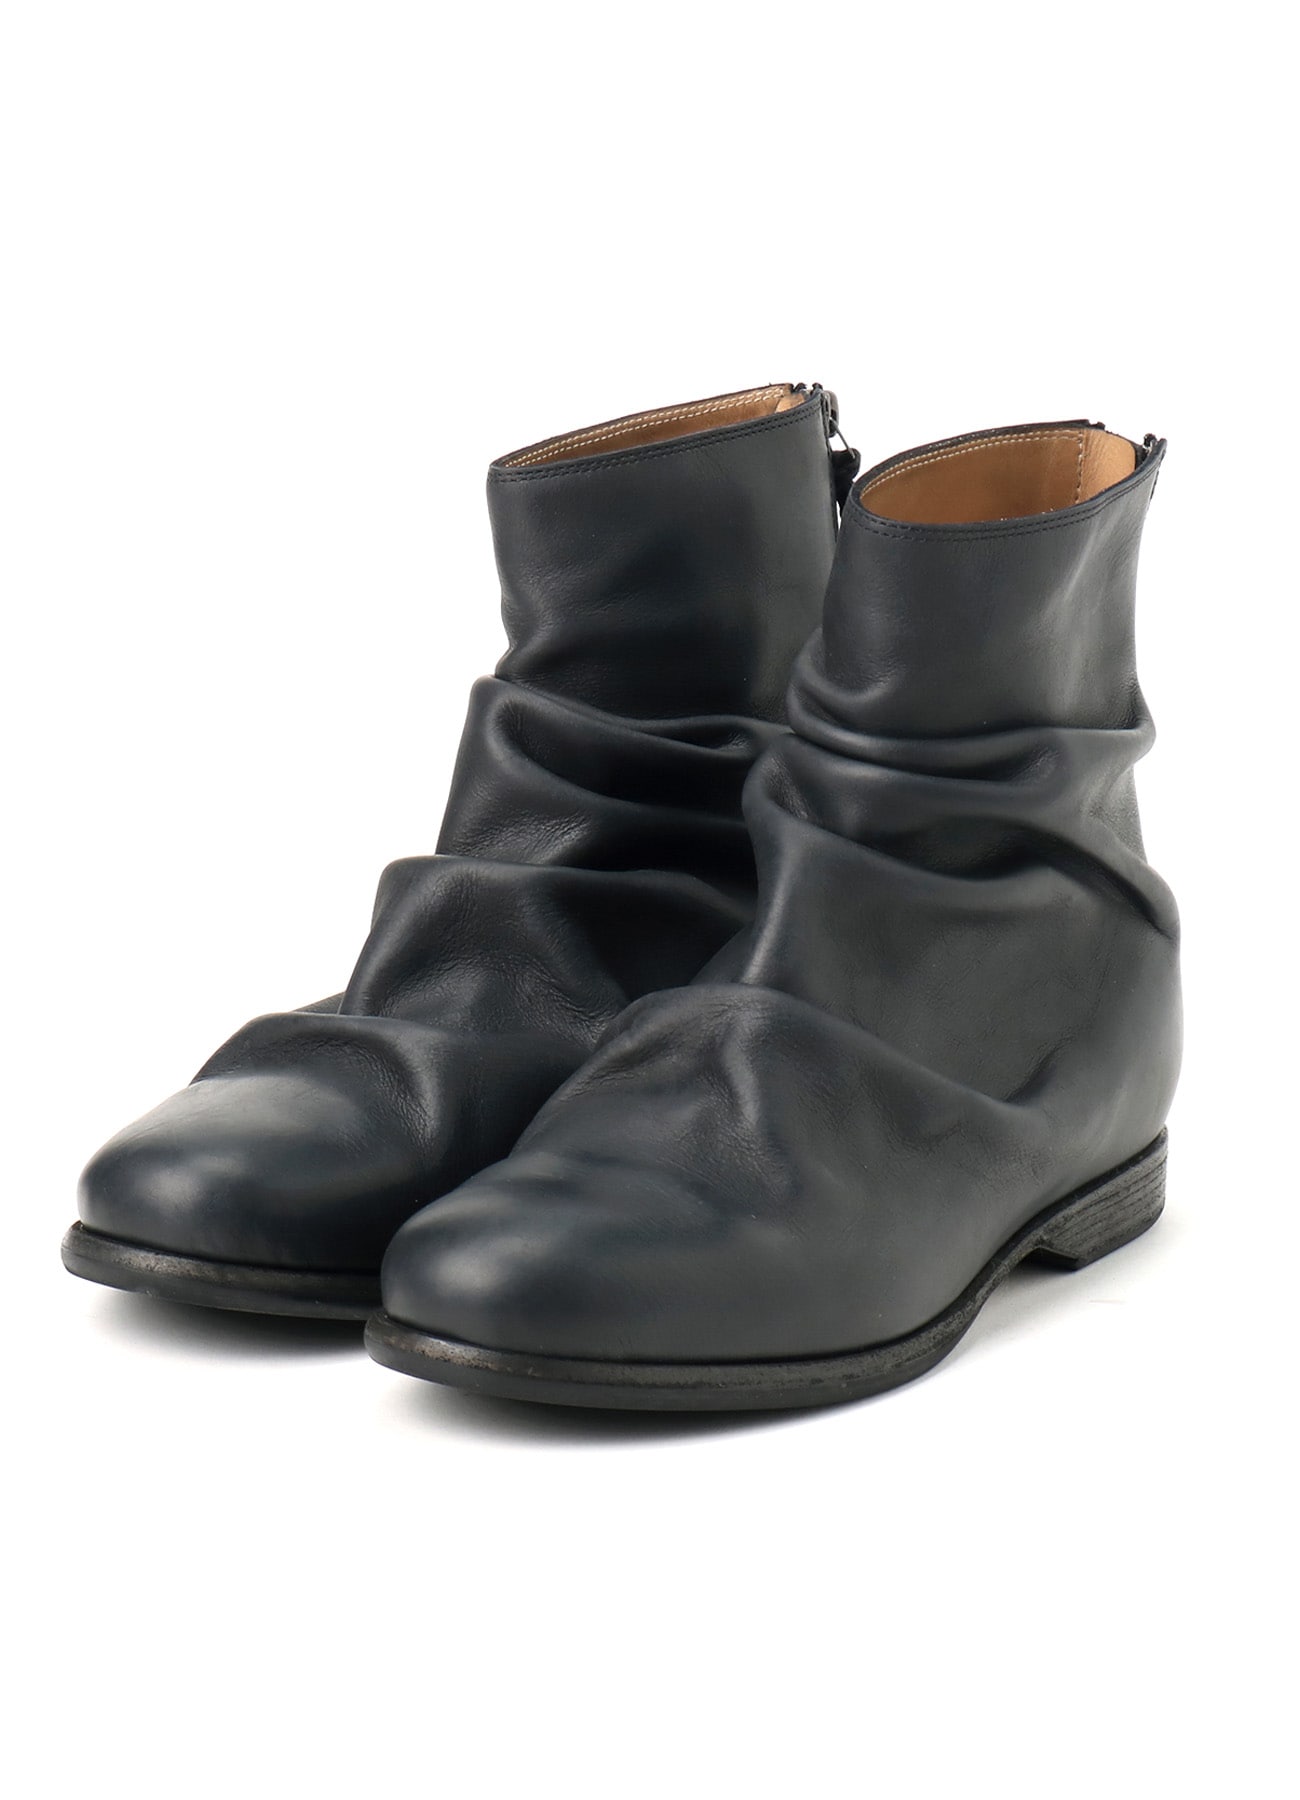 TUMBLED COWHIDE LEATHER CROPPED BOOTS